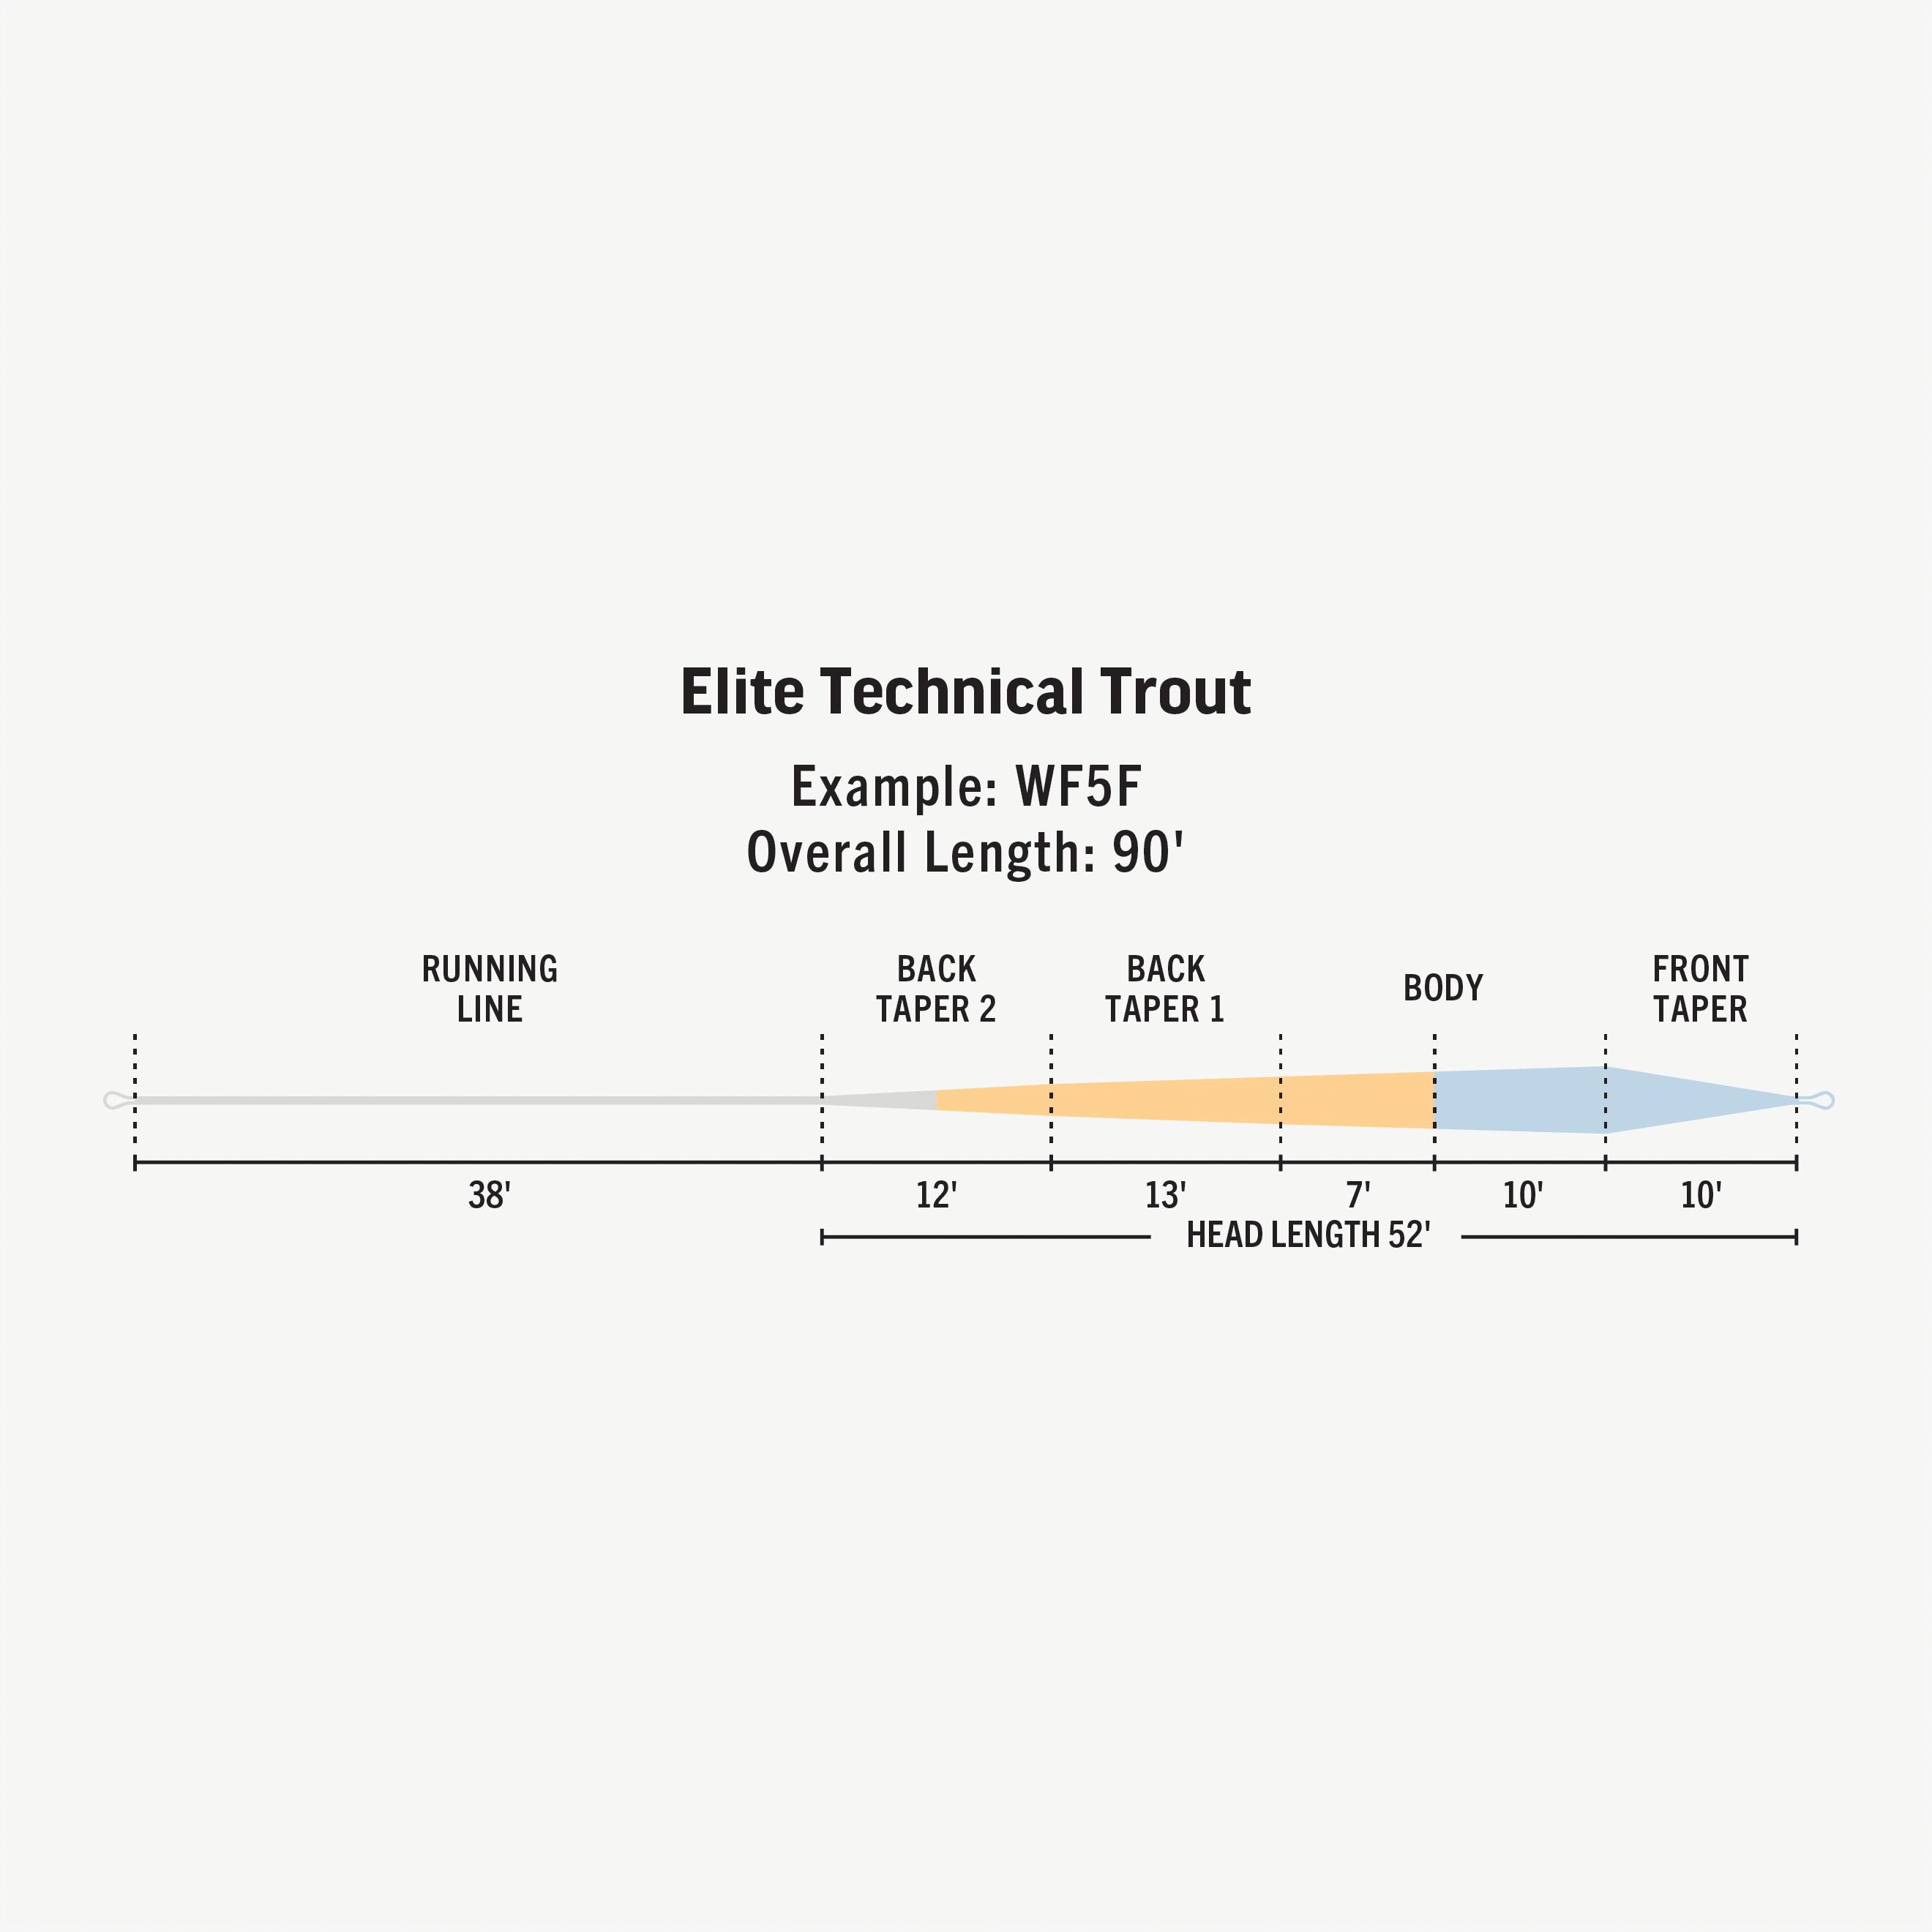 Rio Elite Technical Trout Fly Line